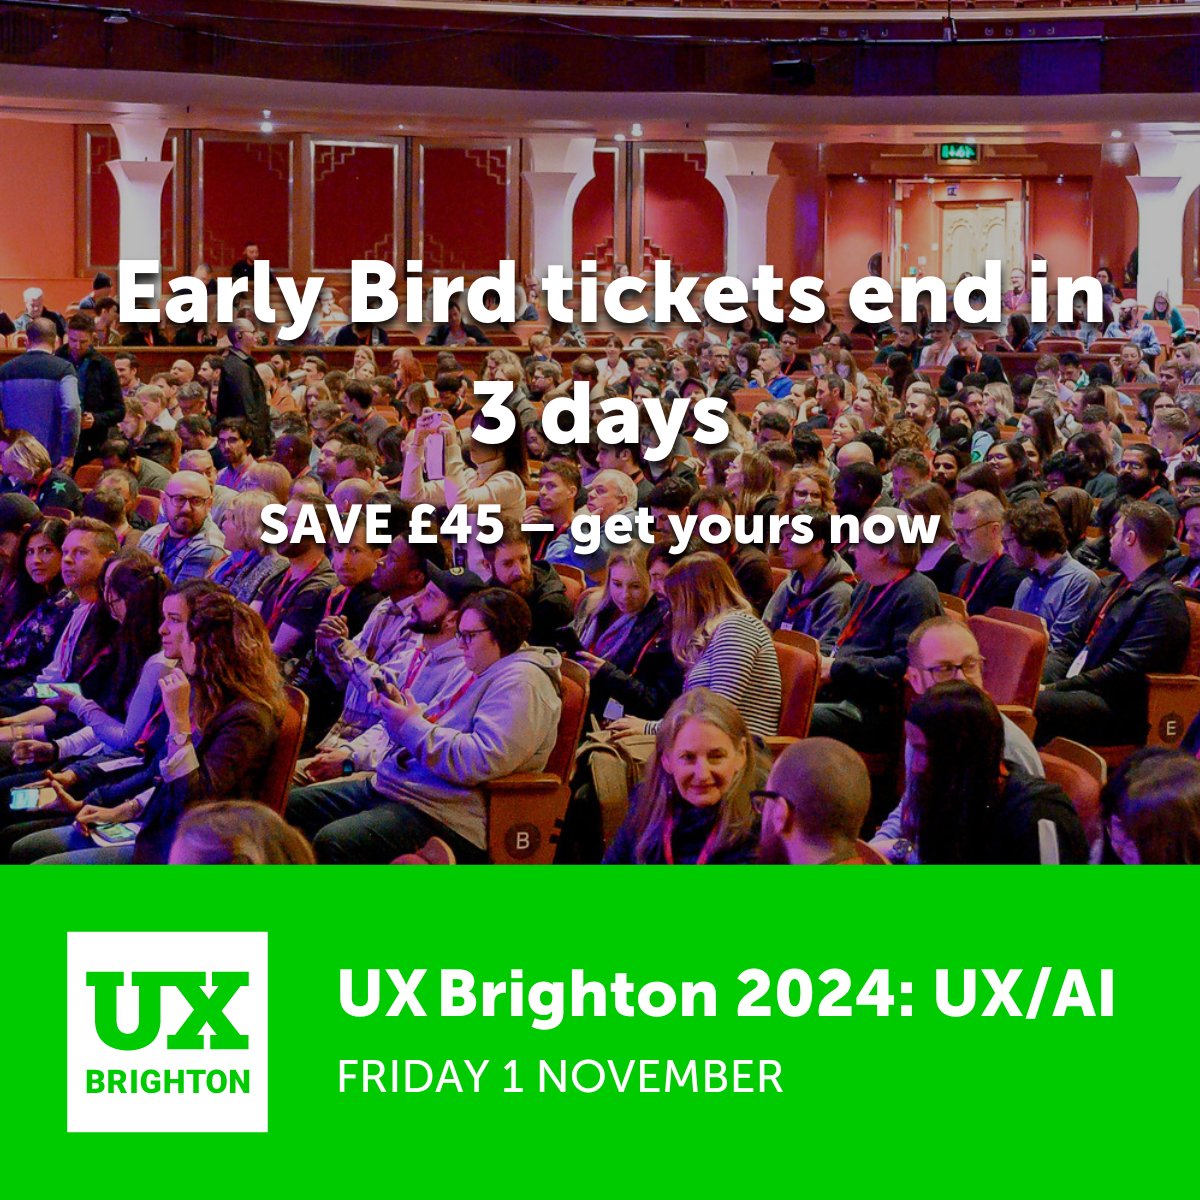 🕒 Early Bird Countdown: Just 3 Days Left to Save £45.00 on UX Brighton 2024 Tickets! 🕒 The countdown is on, and time is of the essence! With only 3 days left, your chance to enjoy Early Bird savings for UX Brighton 2024. Seize this opportunity to immerse yourself in the…